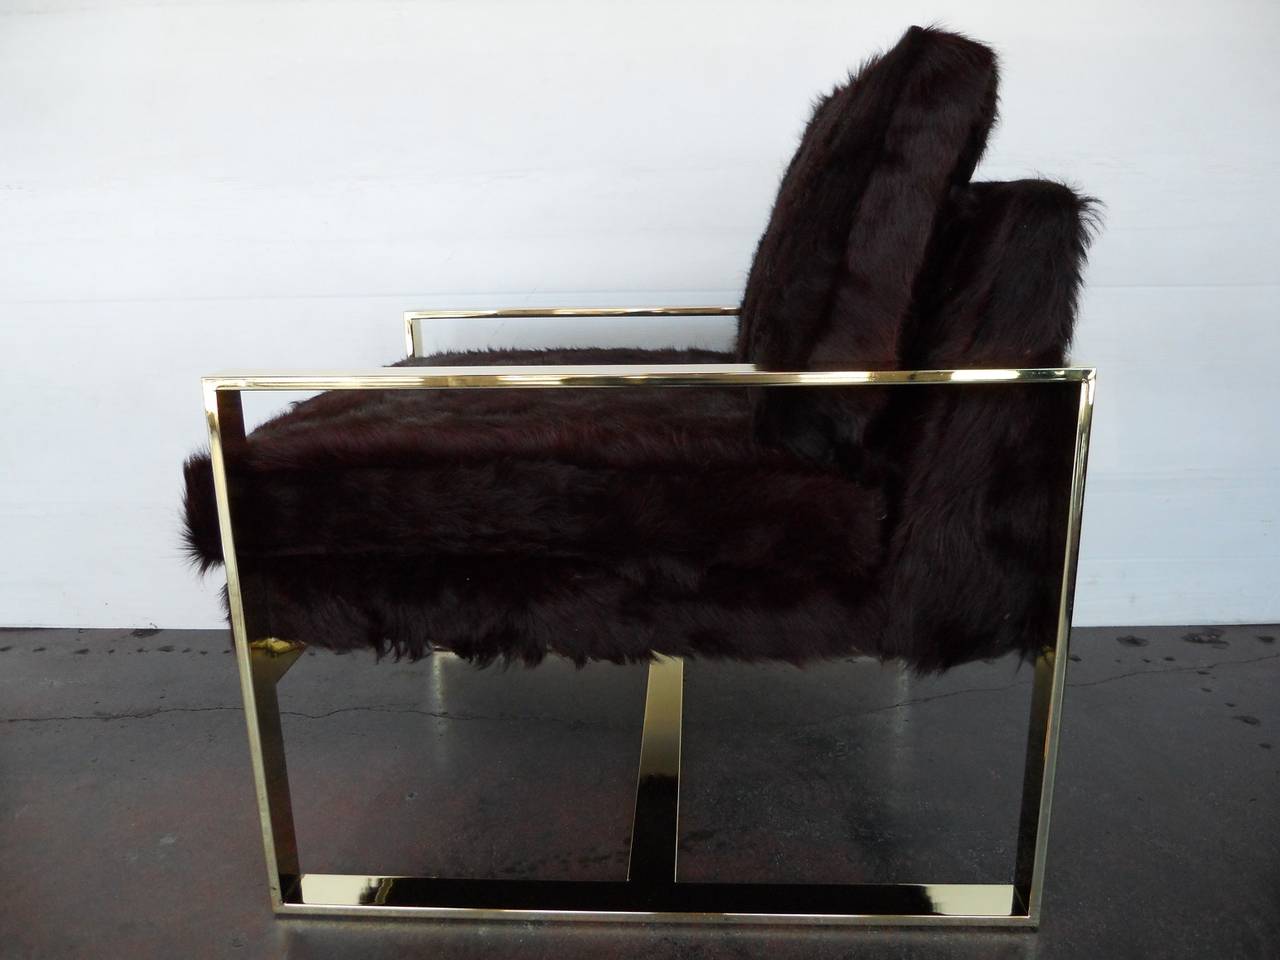 Pair of Milo Baughman chairs
brass-plated metal with newly re-upholstered cowhide.
Measures: 21.5